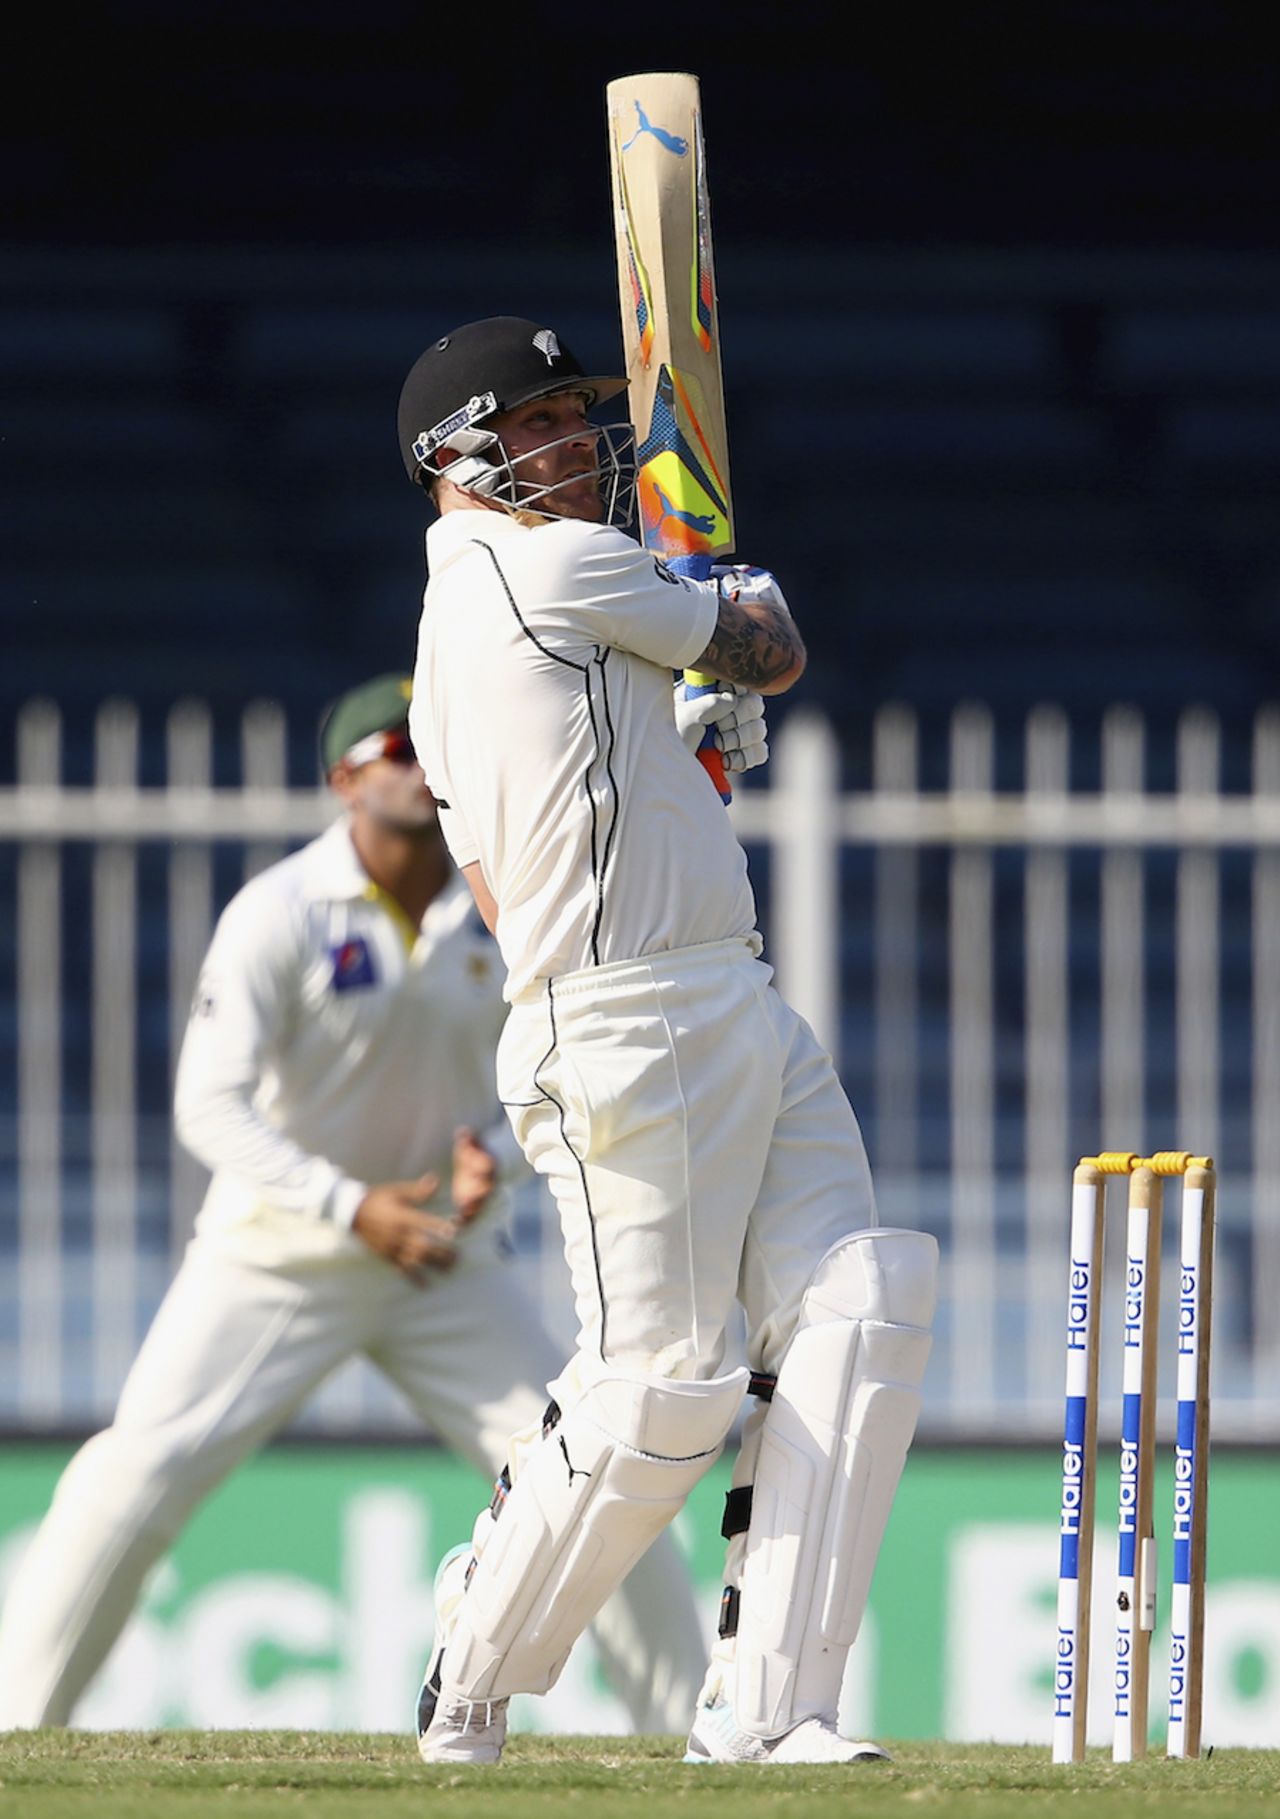 Brendon McCullum targets the midwicket boundary, Pakistan v New Zealand, 3rd Test, Sharjah, 2nd day, November 28, 2014